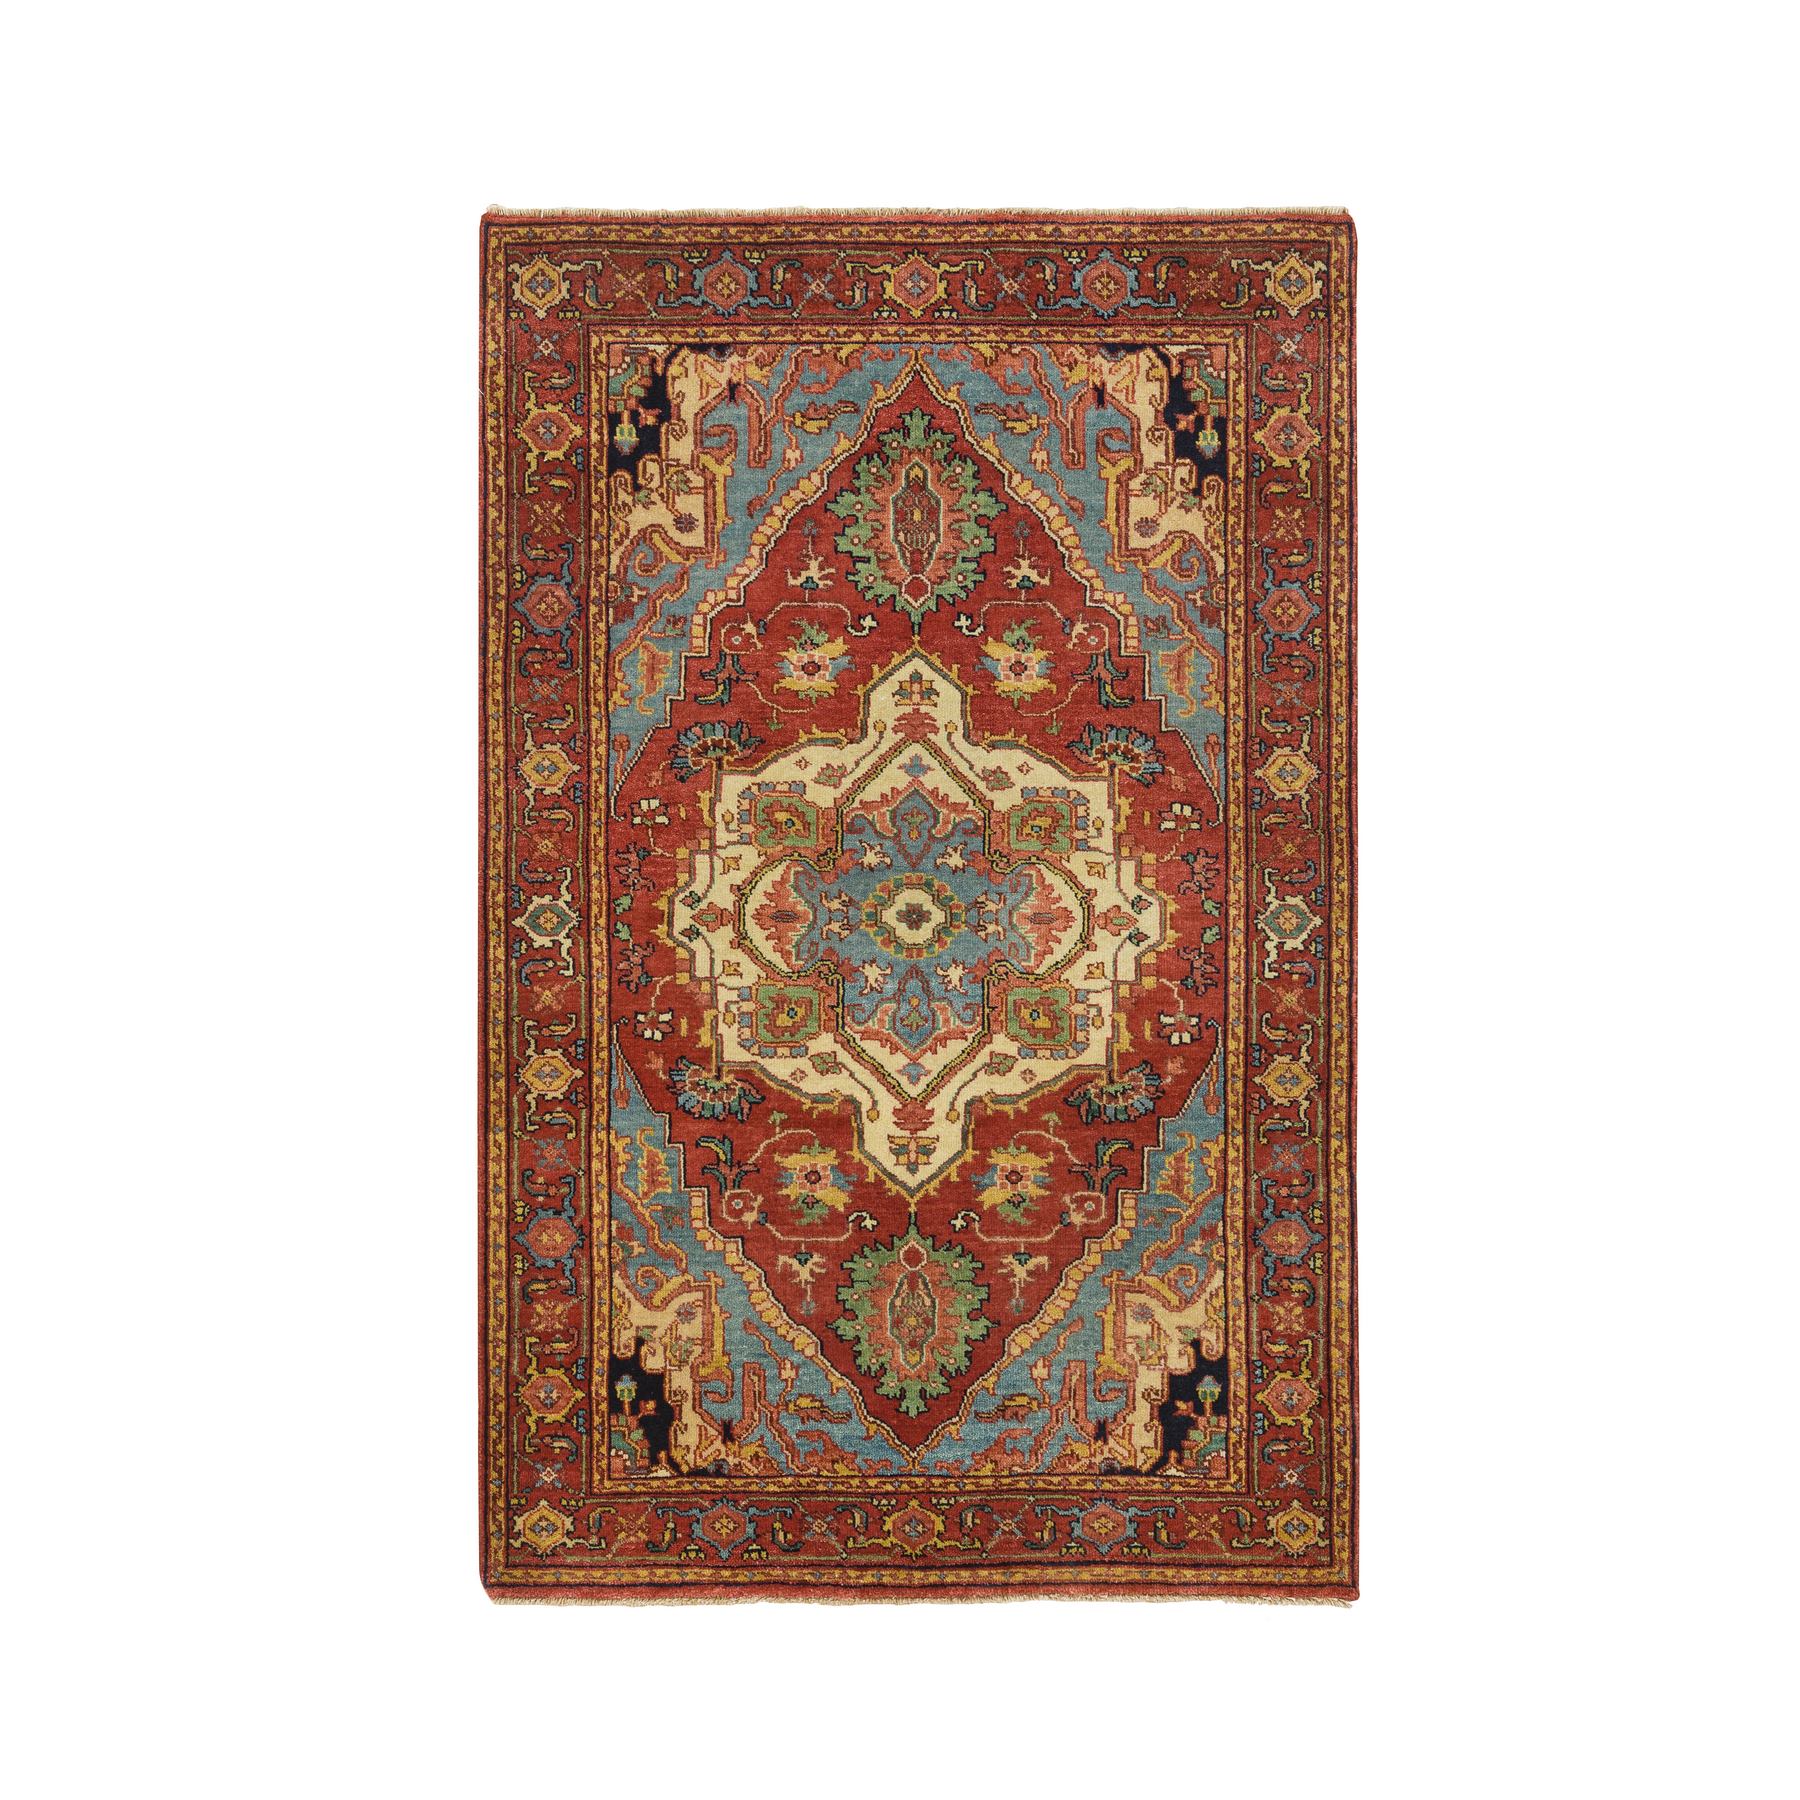  Wool Hand-Knotted Area Rug 3'2